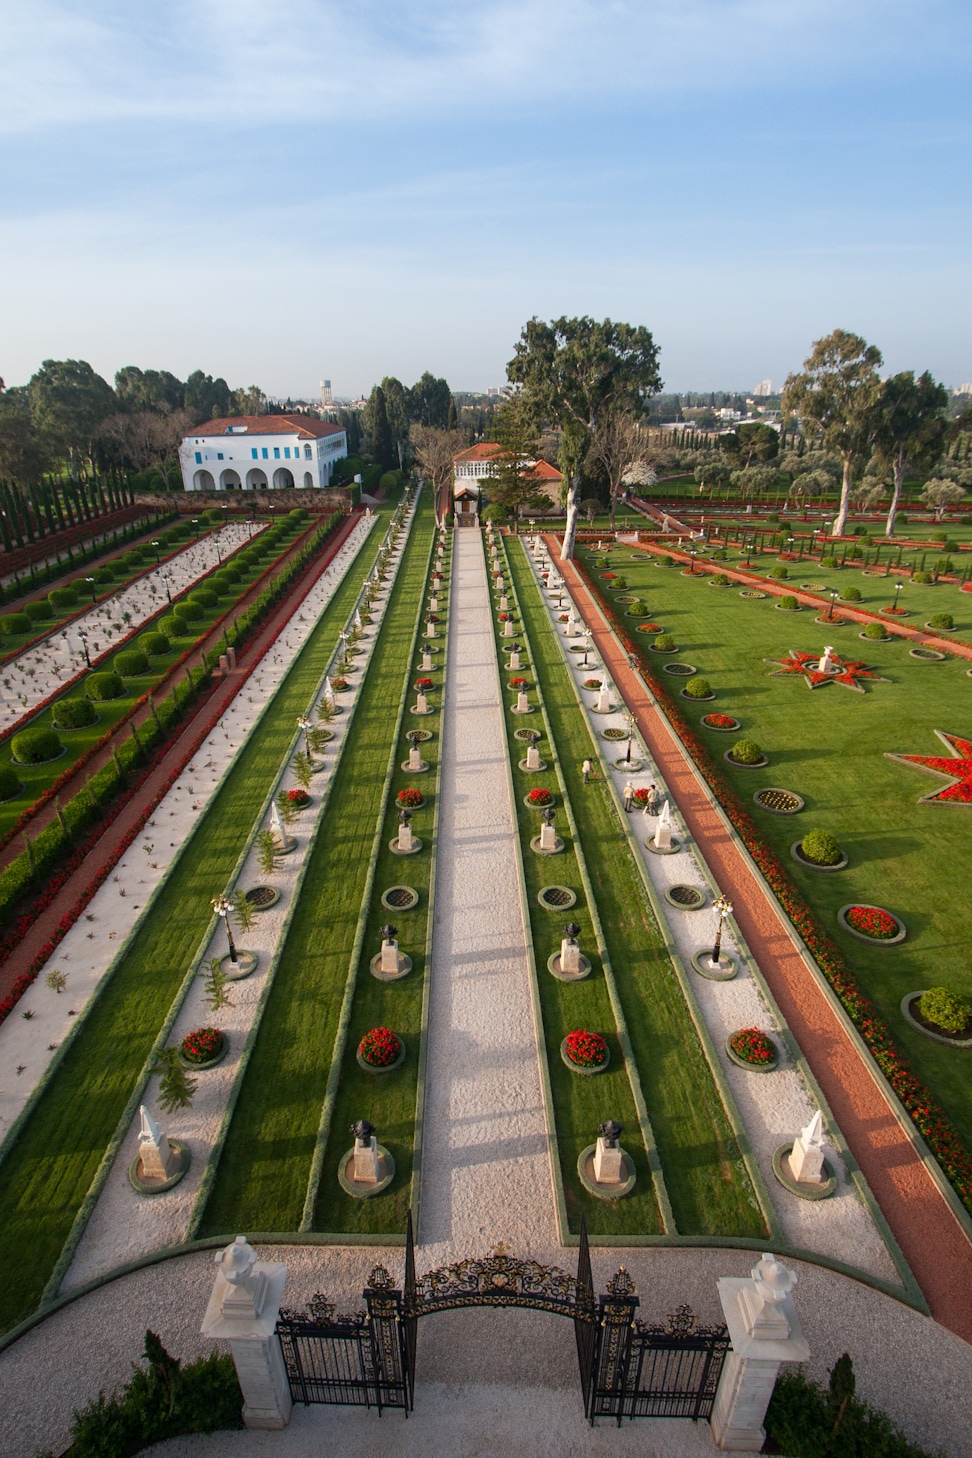 Aerial view of the Shrine of Bahá’u’lláh, the Mansion of Bahjí, and surrounding gardens